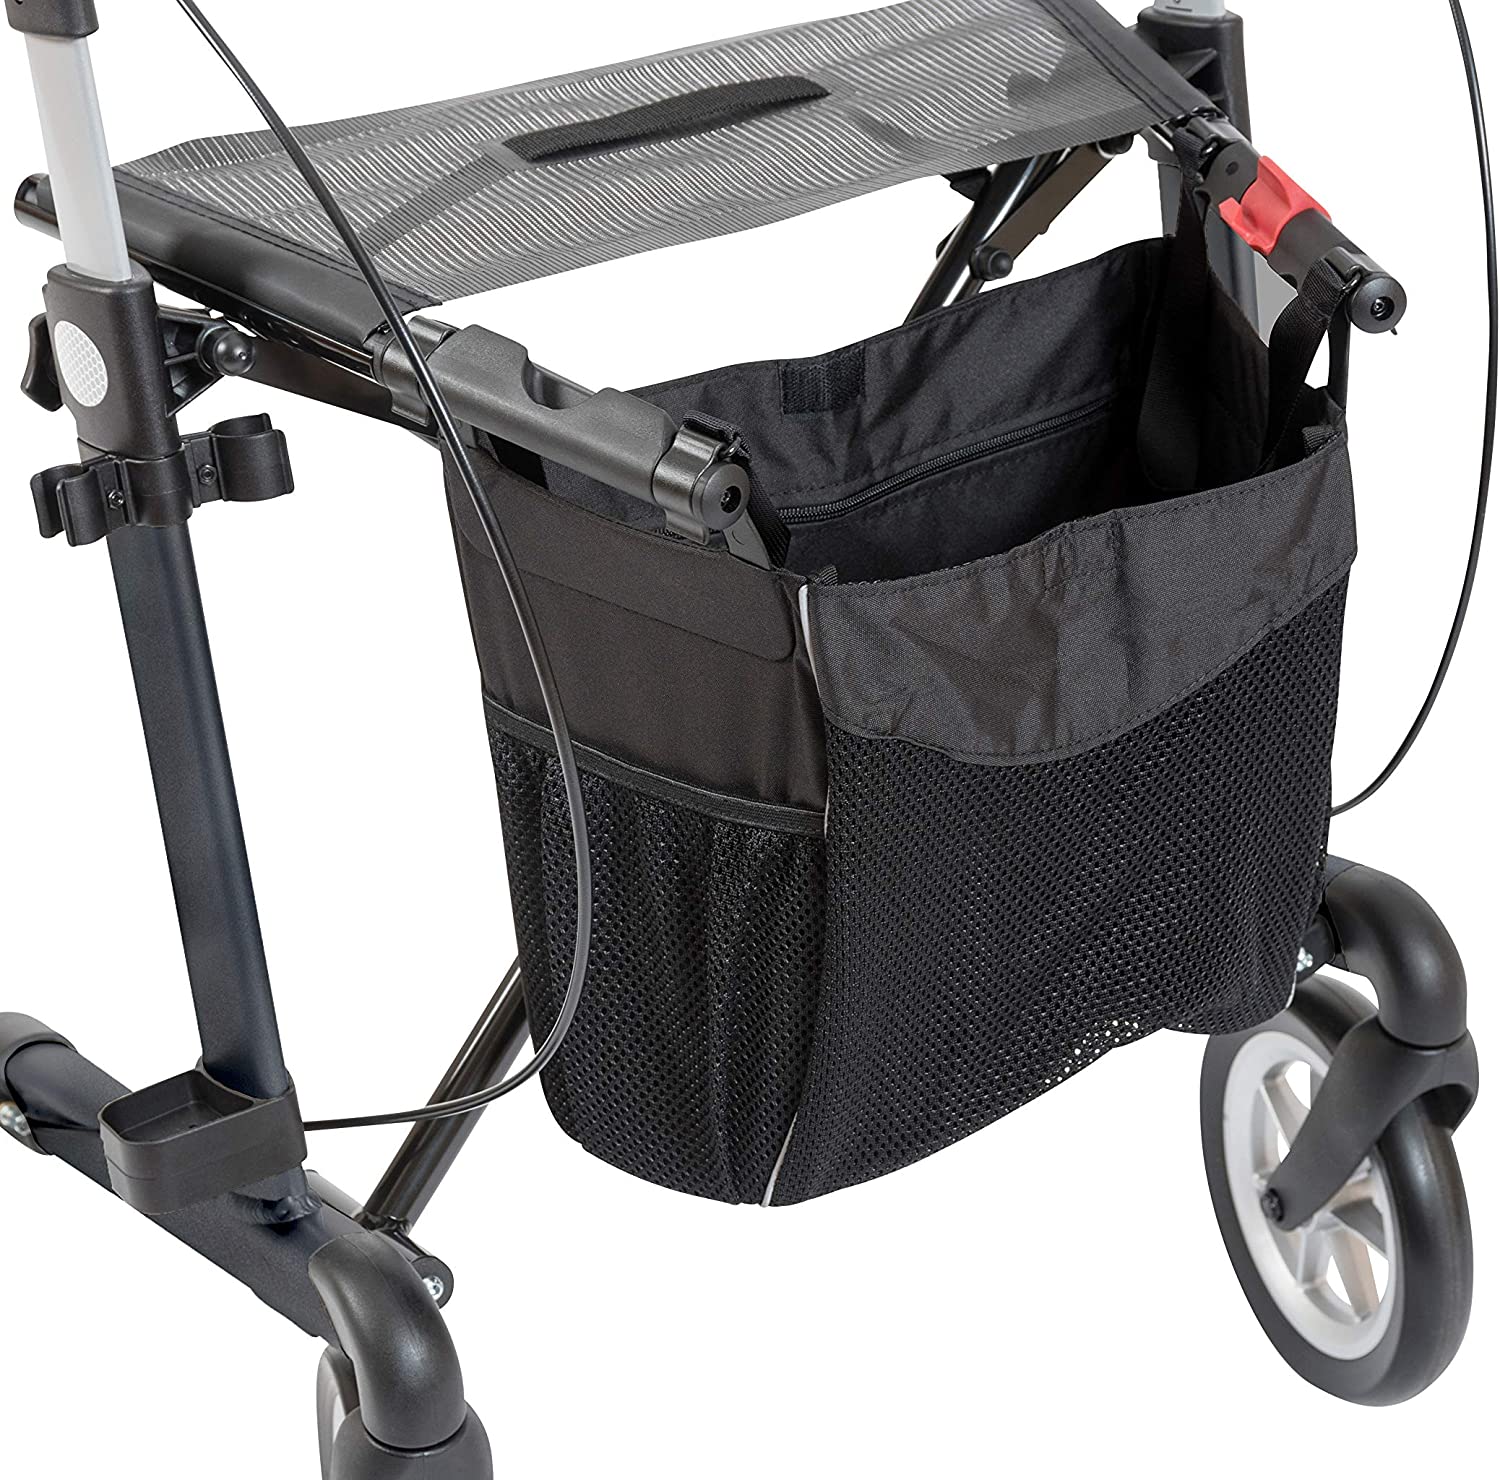 Rehasense Lightweight Rollator Server, Lightweight & Foldable, Aluminium Rollator Load Capacity up to 150 kg with Removable Shopping Bag, Tilting Aid, Aluminium Rollator Foldable, Size L, Anthracite